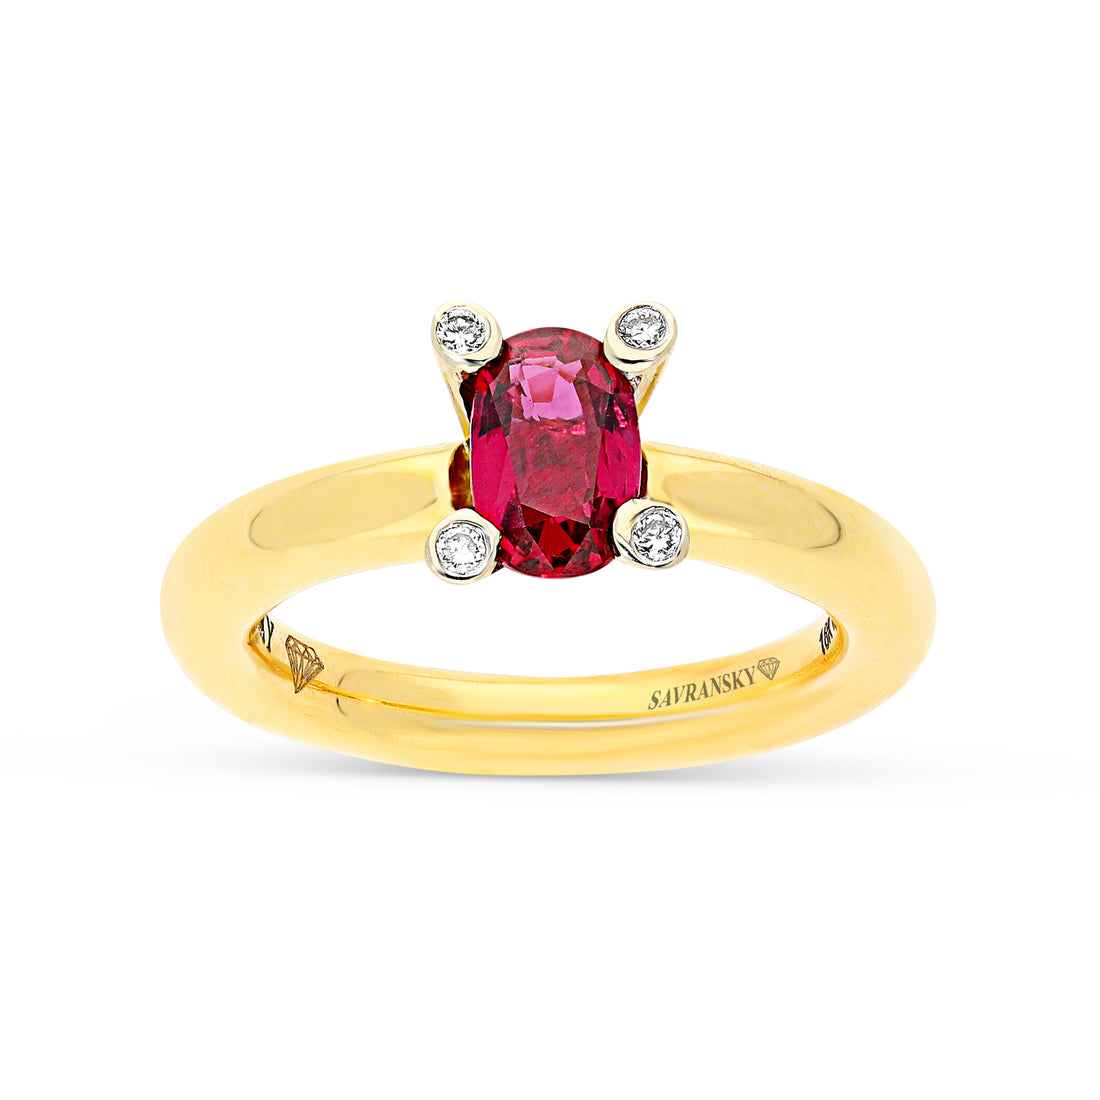 Oval Cut Natural Ruby Diamond Detail Four Prong Birthstone Ring